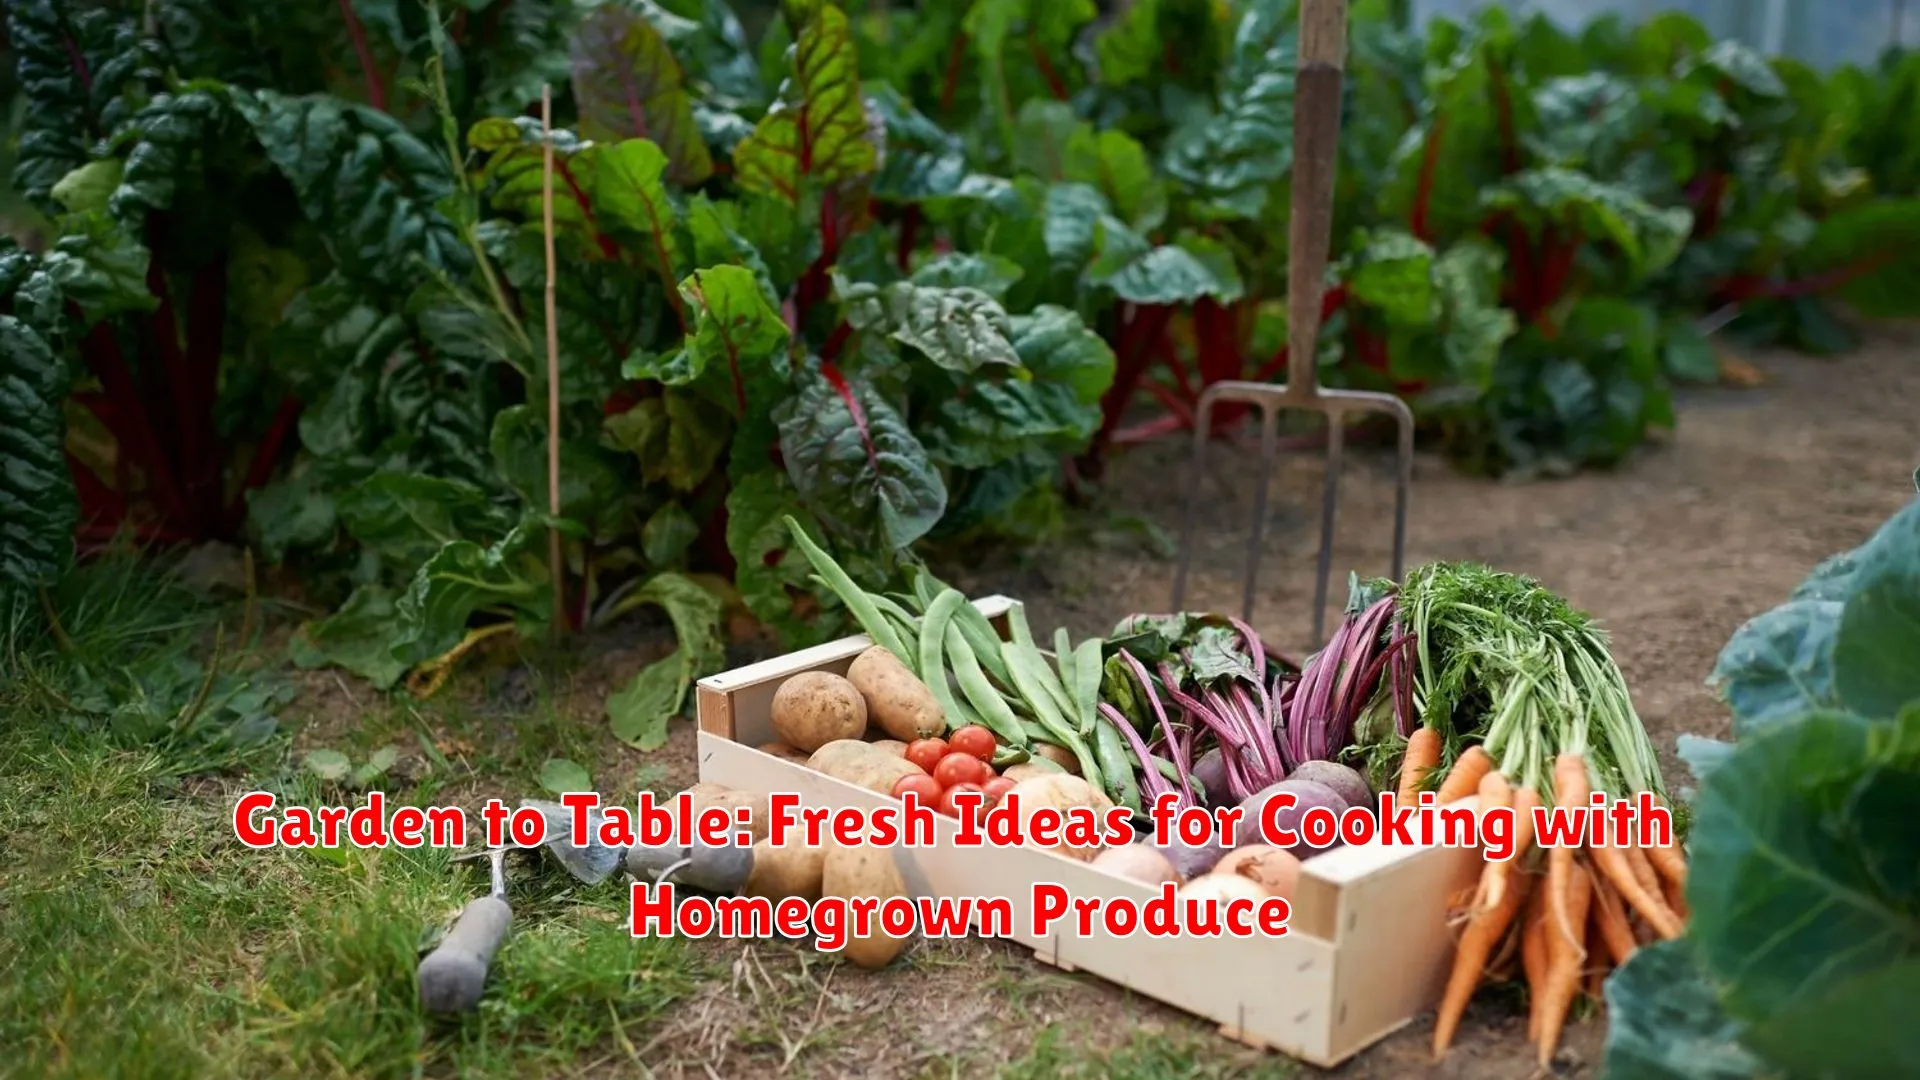 Garden to Table: Fresh Ideas for Cooking with Homegrown Produce